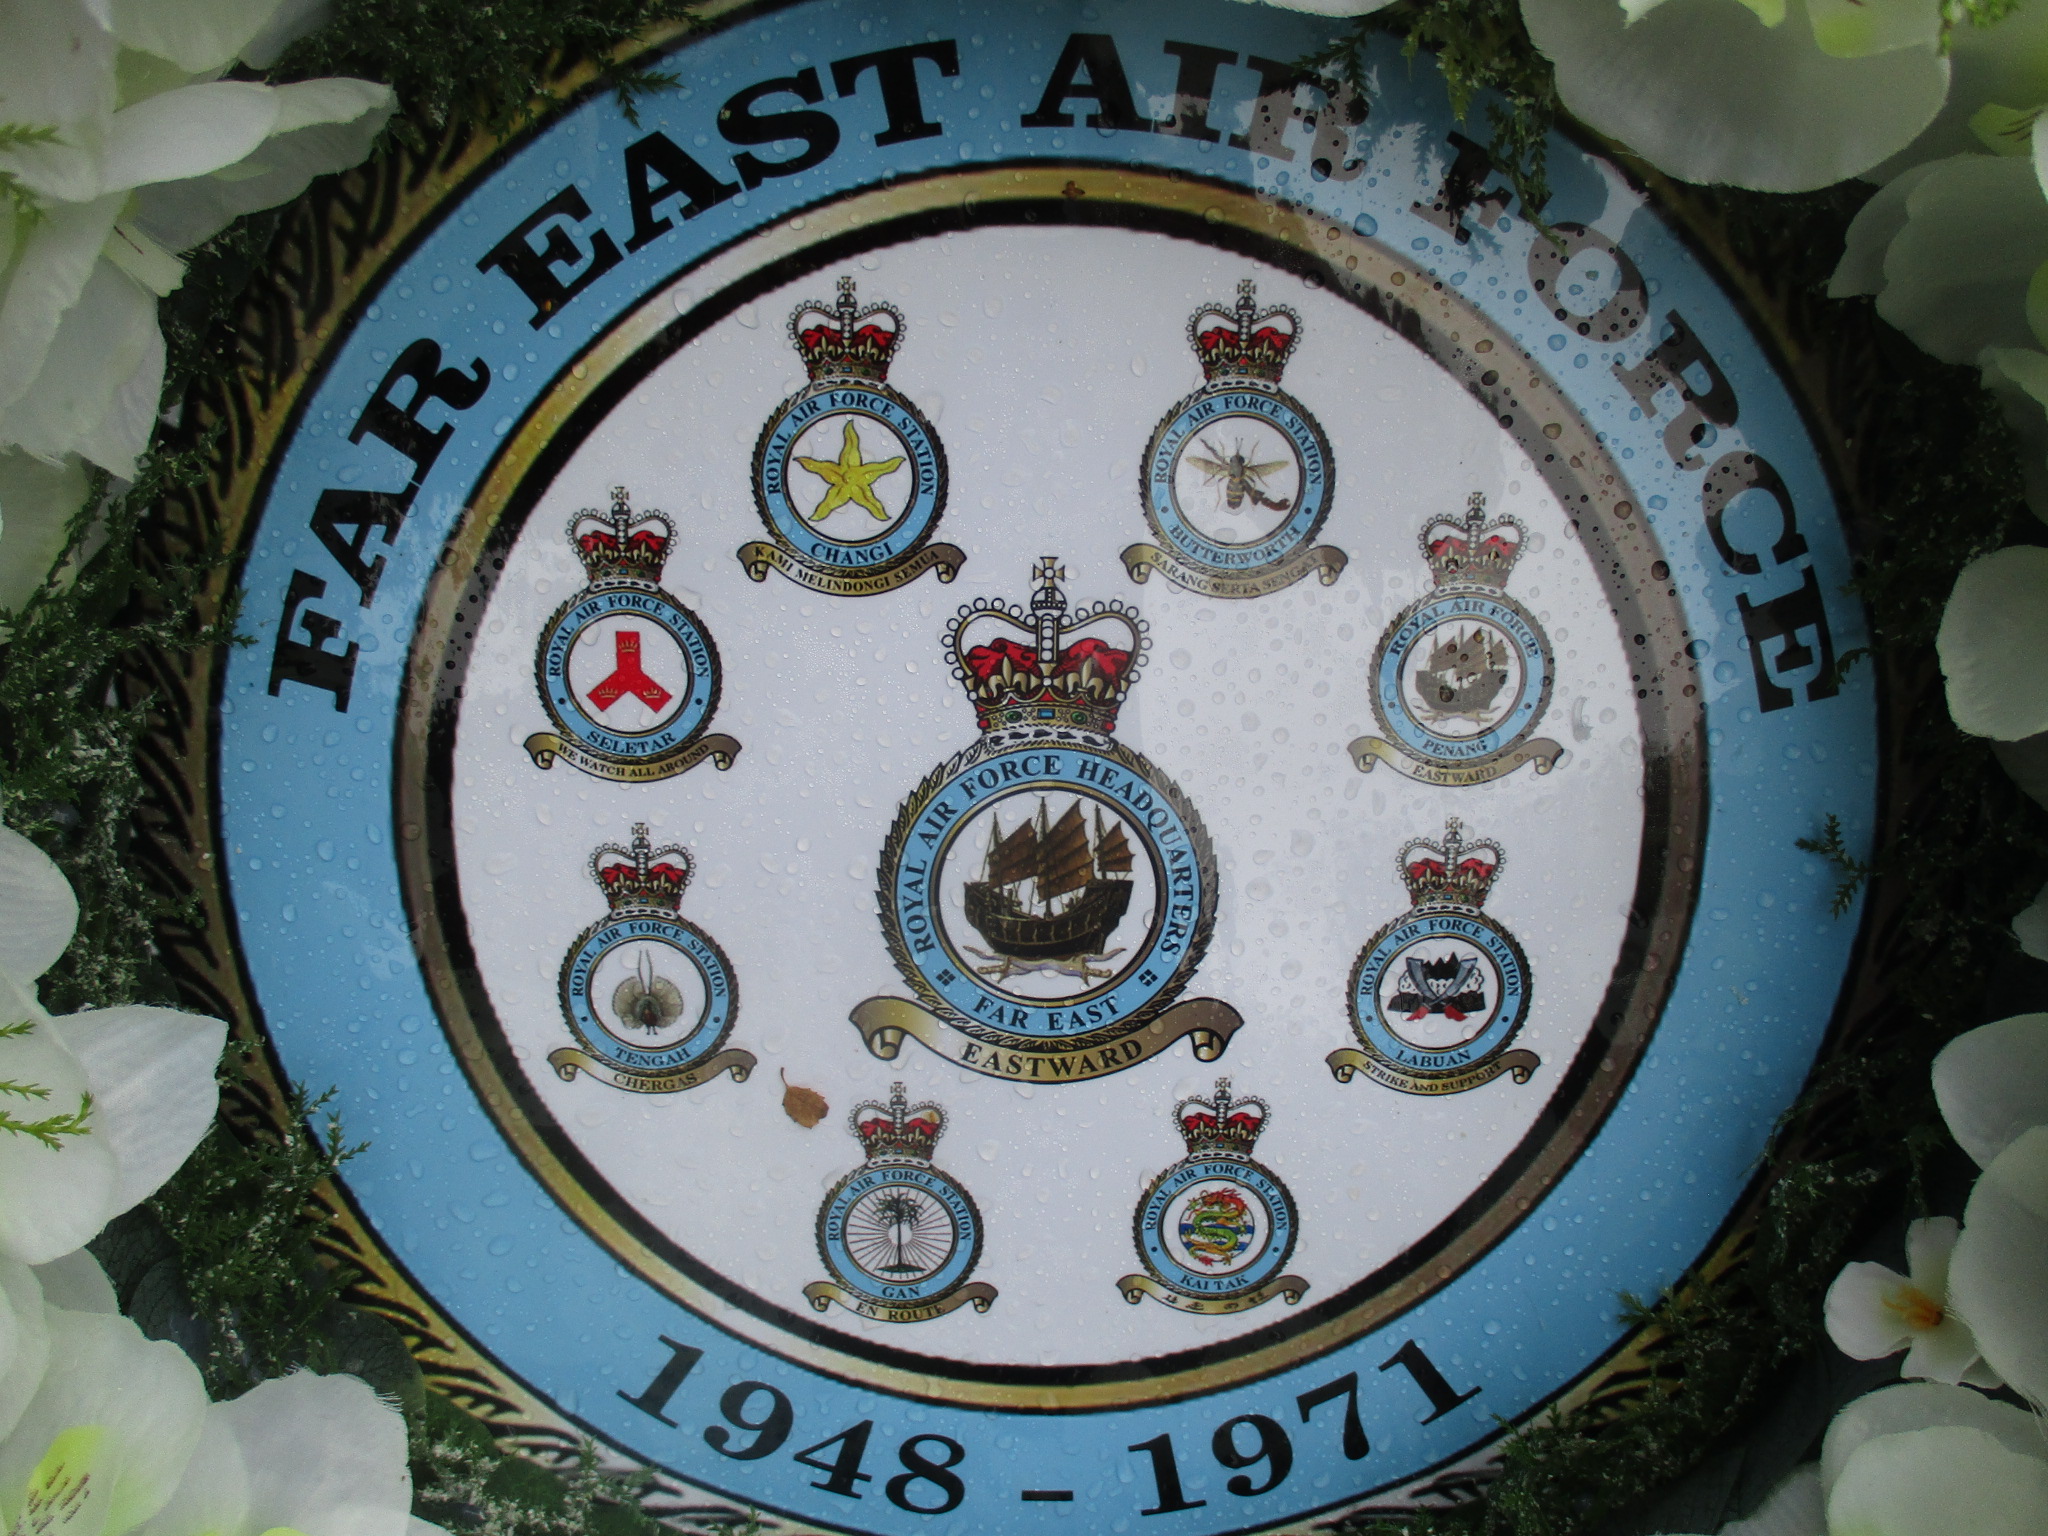 Wreath with Squadron crests and flowers.